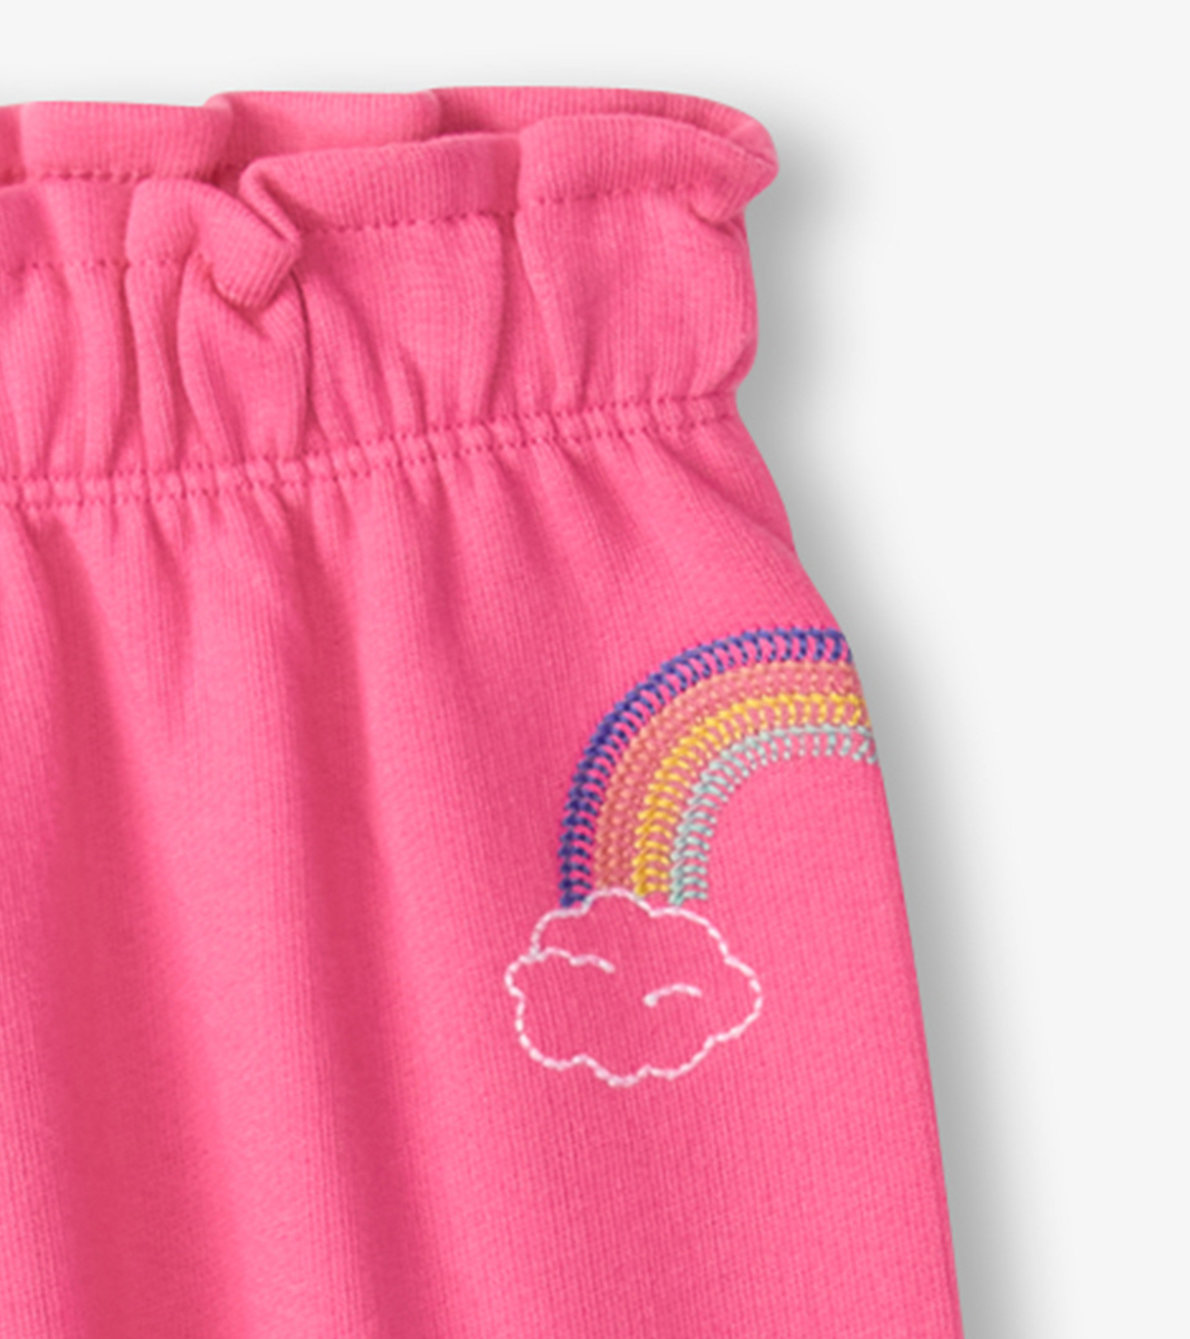 View larger image of Baby & Toddler Girls Pink Love Everywhere Pants